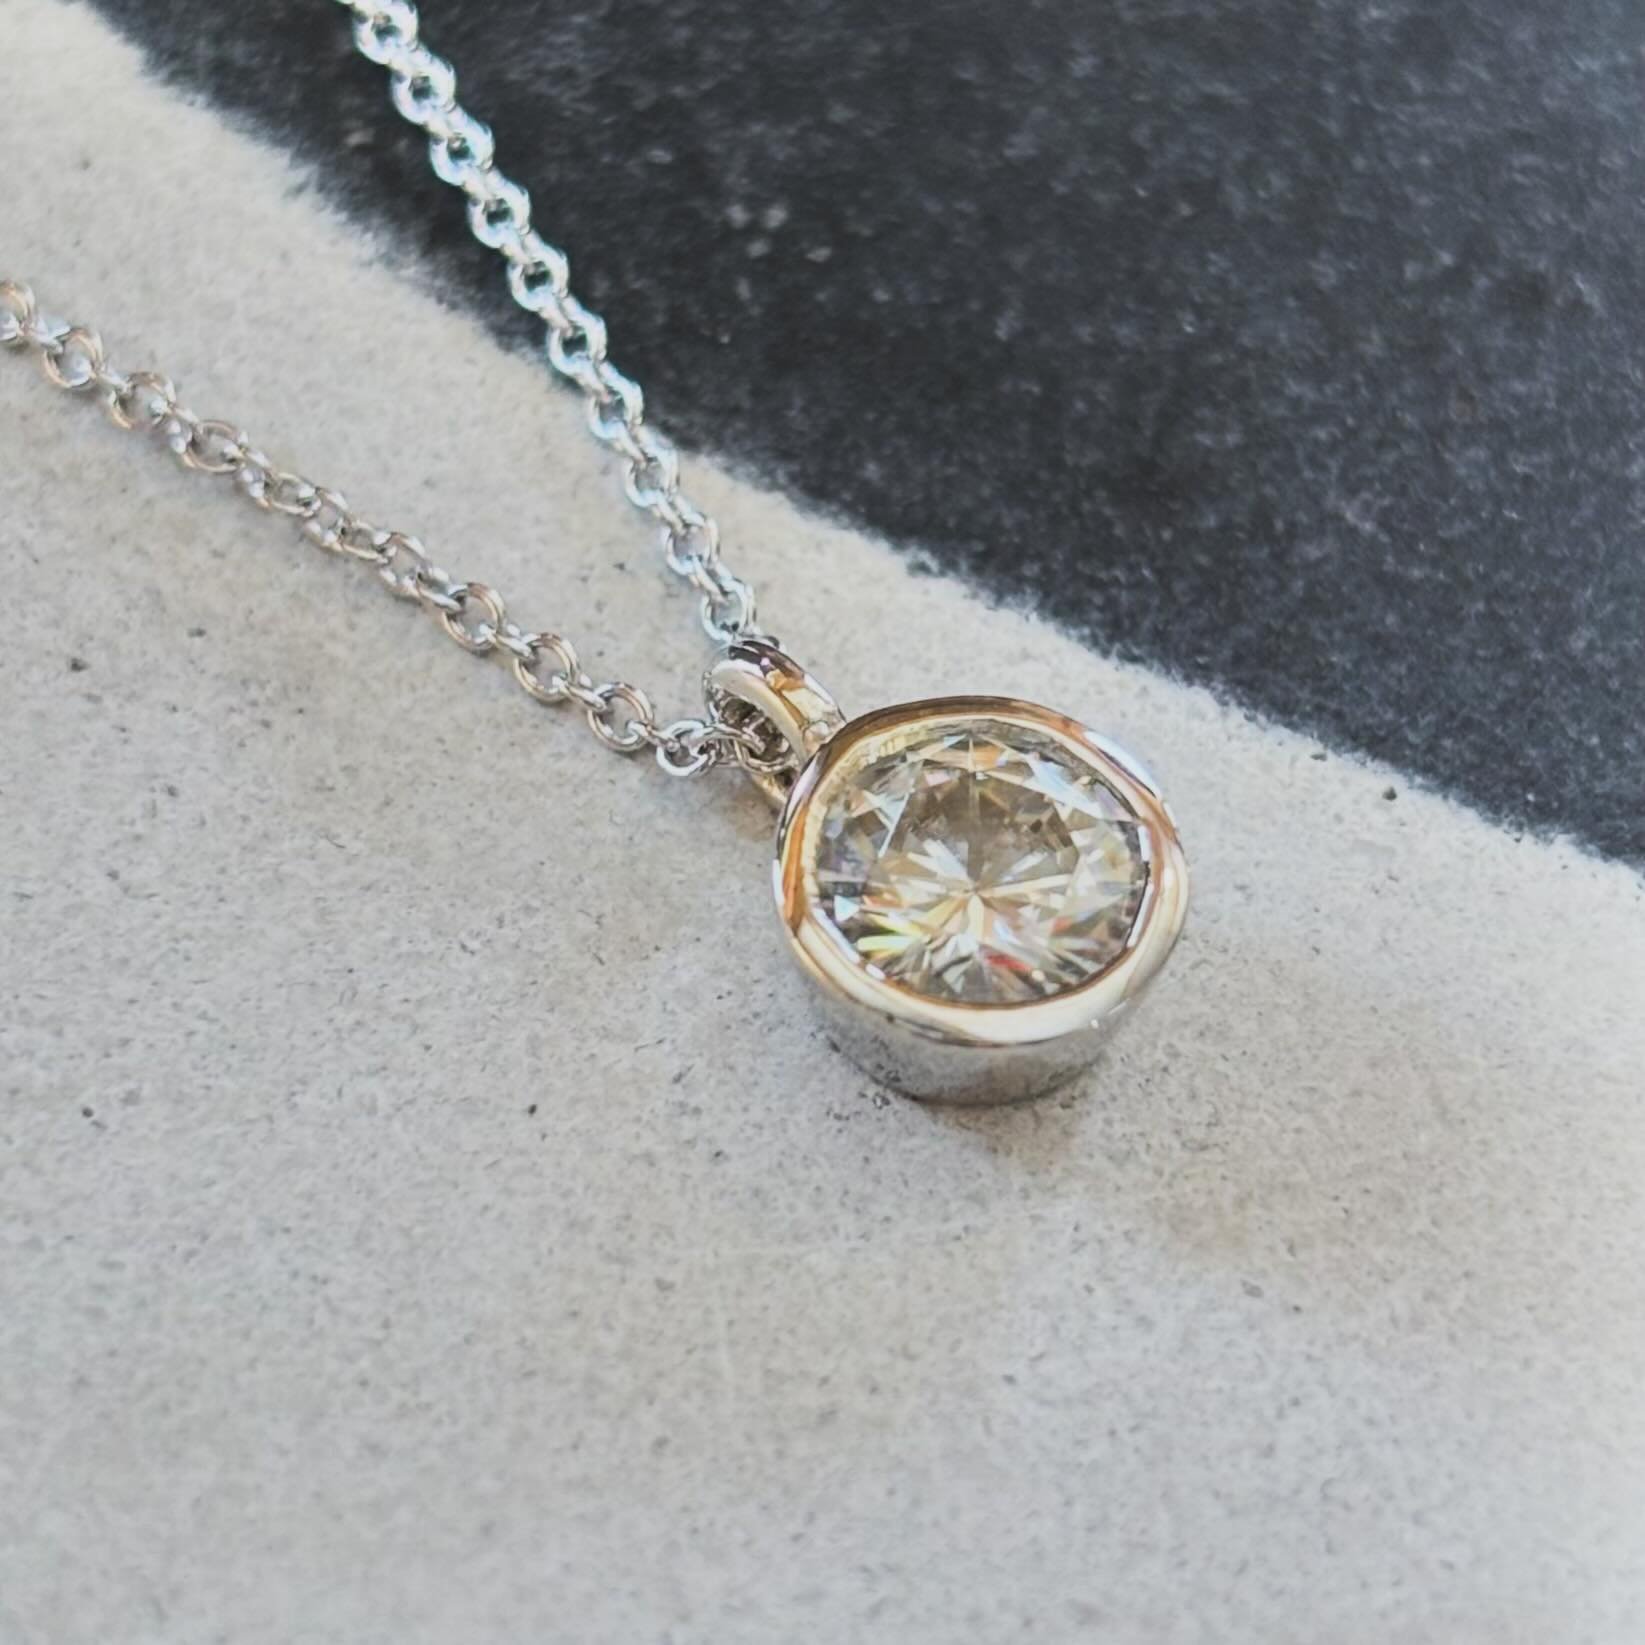 Made using the customers own 1ct moissanite in white gold. Sometimes it&rsquo;s best to go simple and wear it every day.
*
#moissanite #whitegold #commission #newfromold #madeinscotland #etsyseller